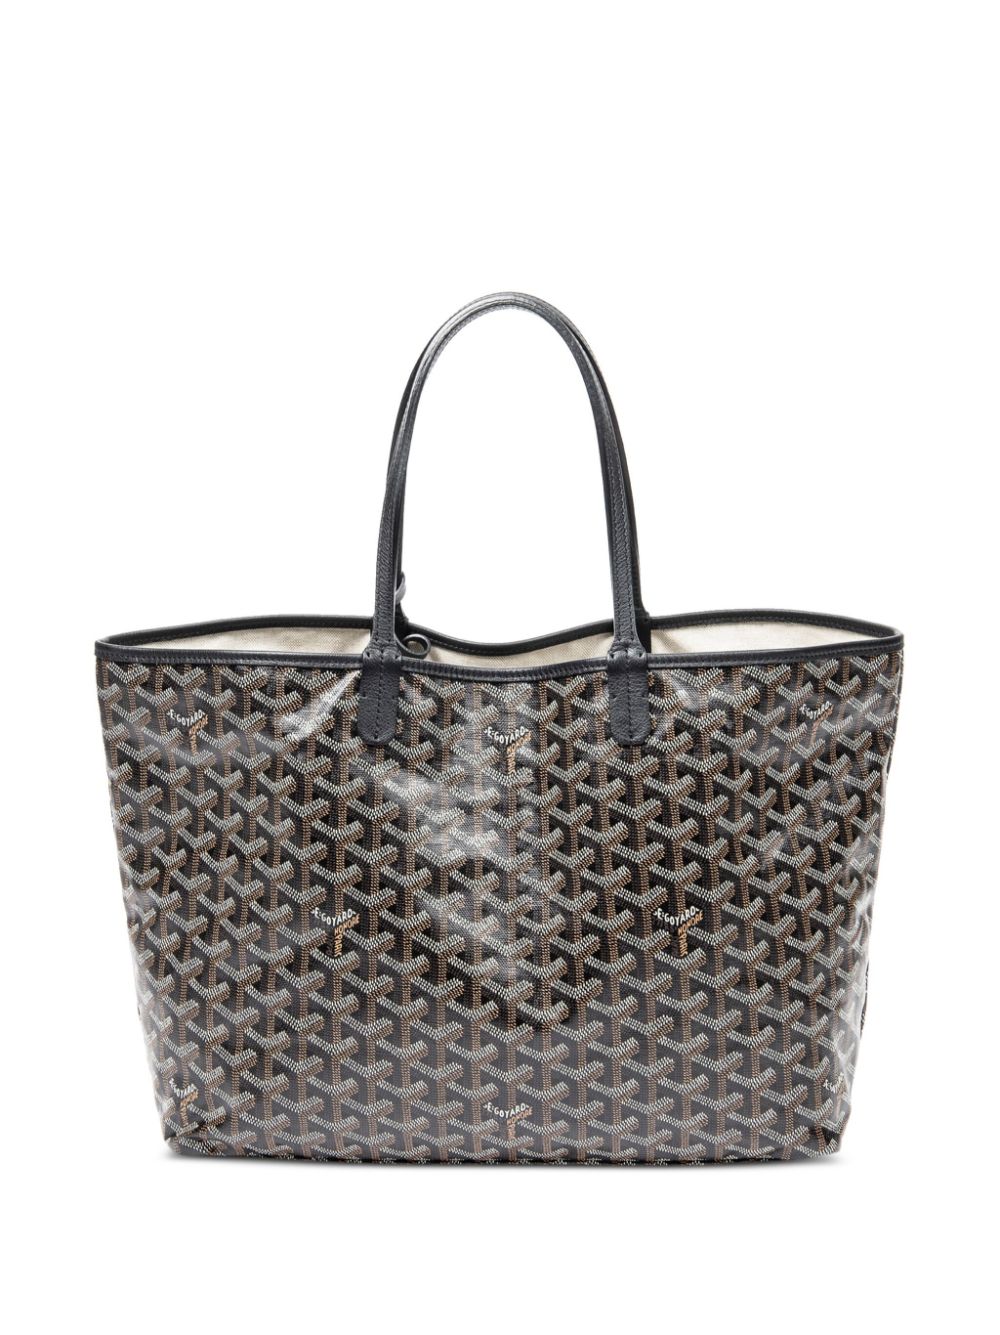 GOYARD Saint-Louis PM Tote Bag Black Used Beautiful with Pouch